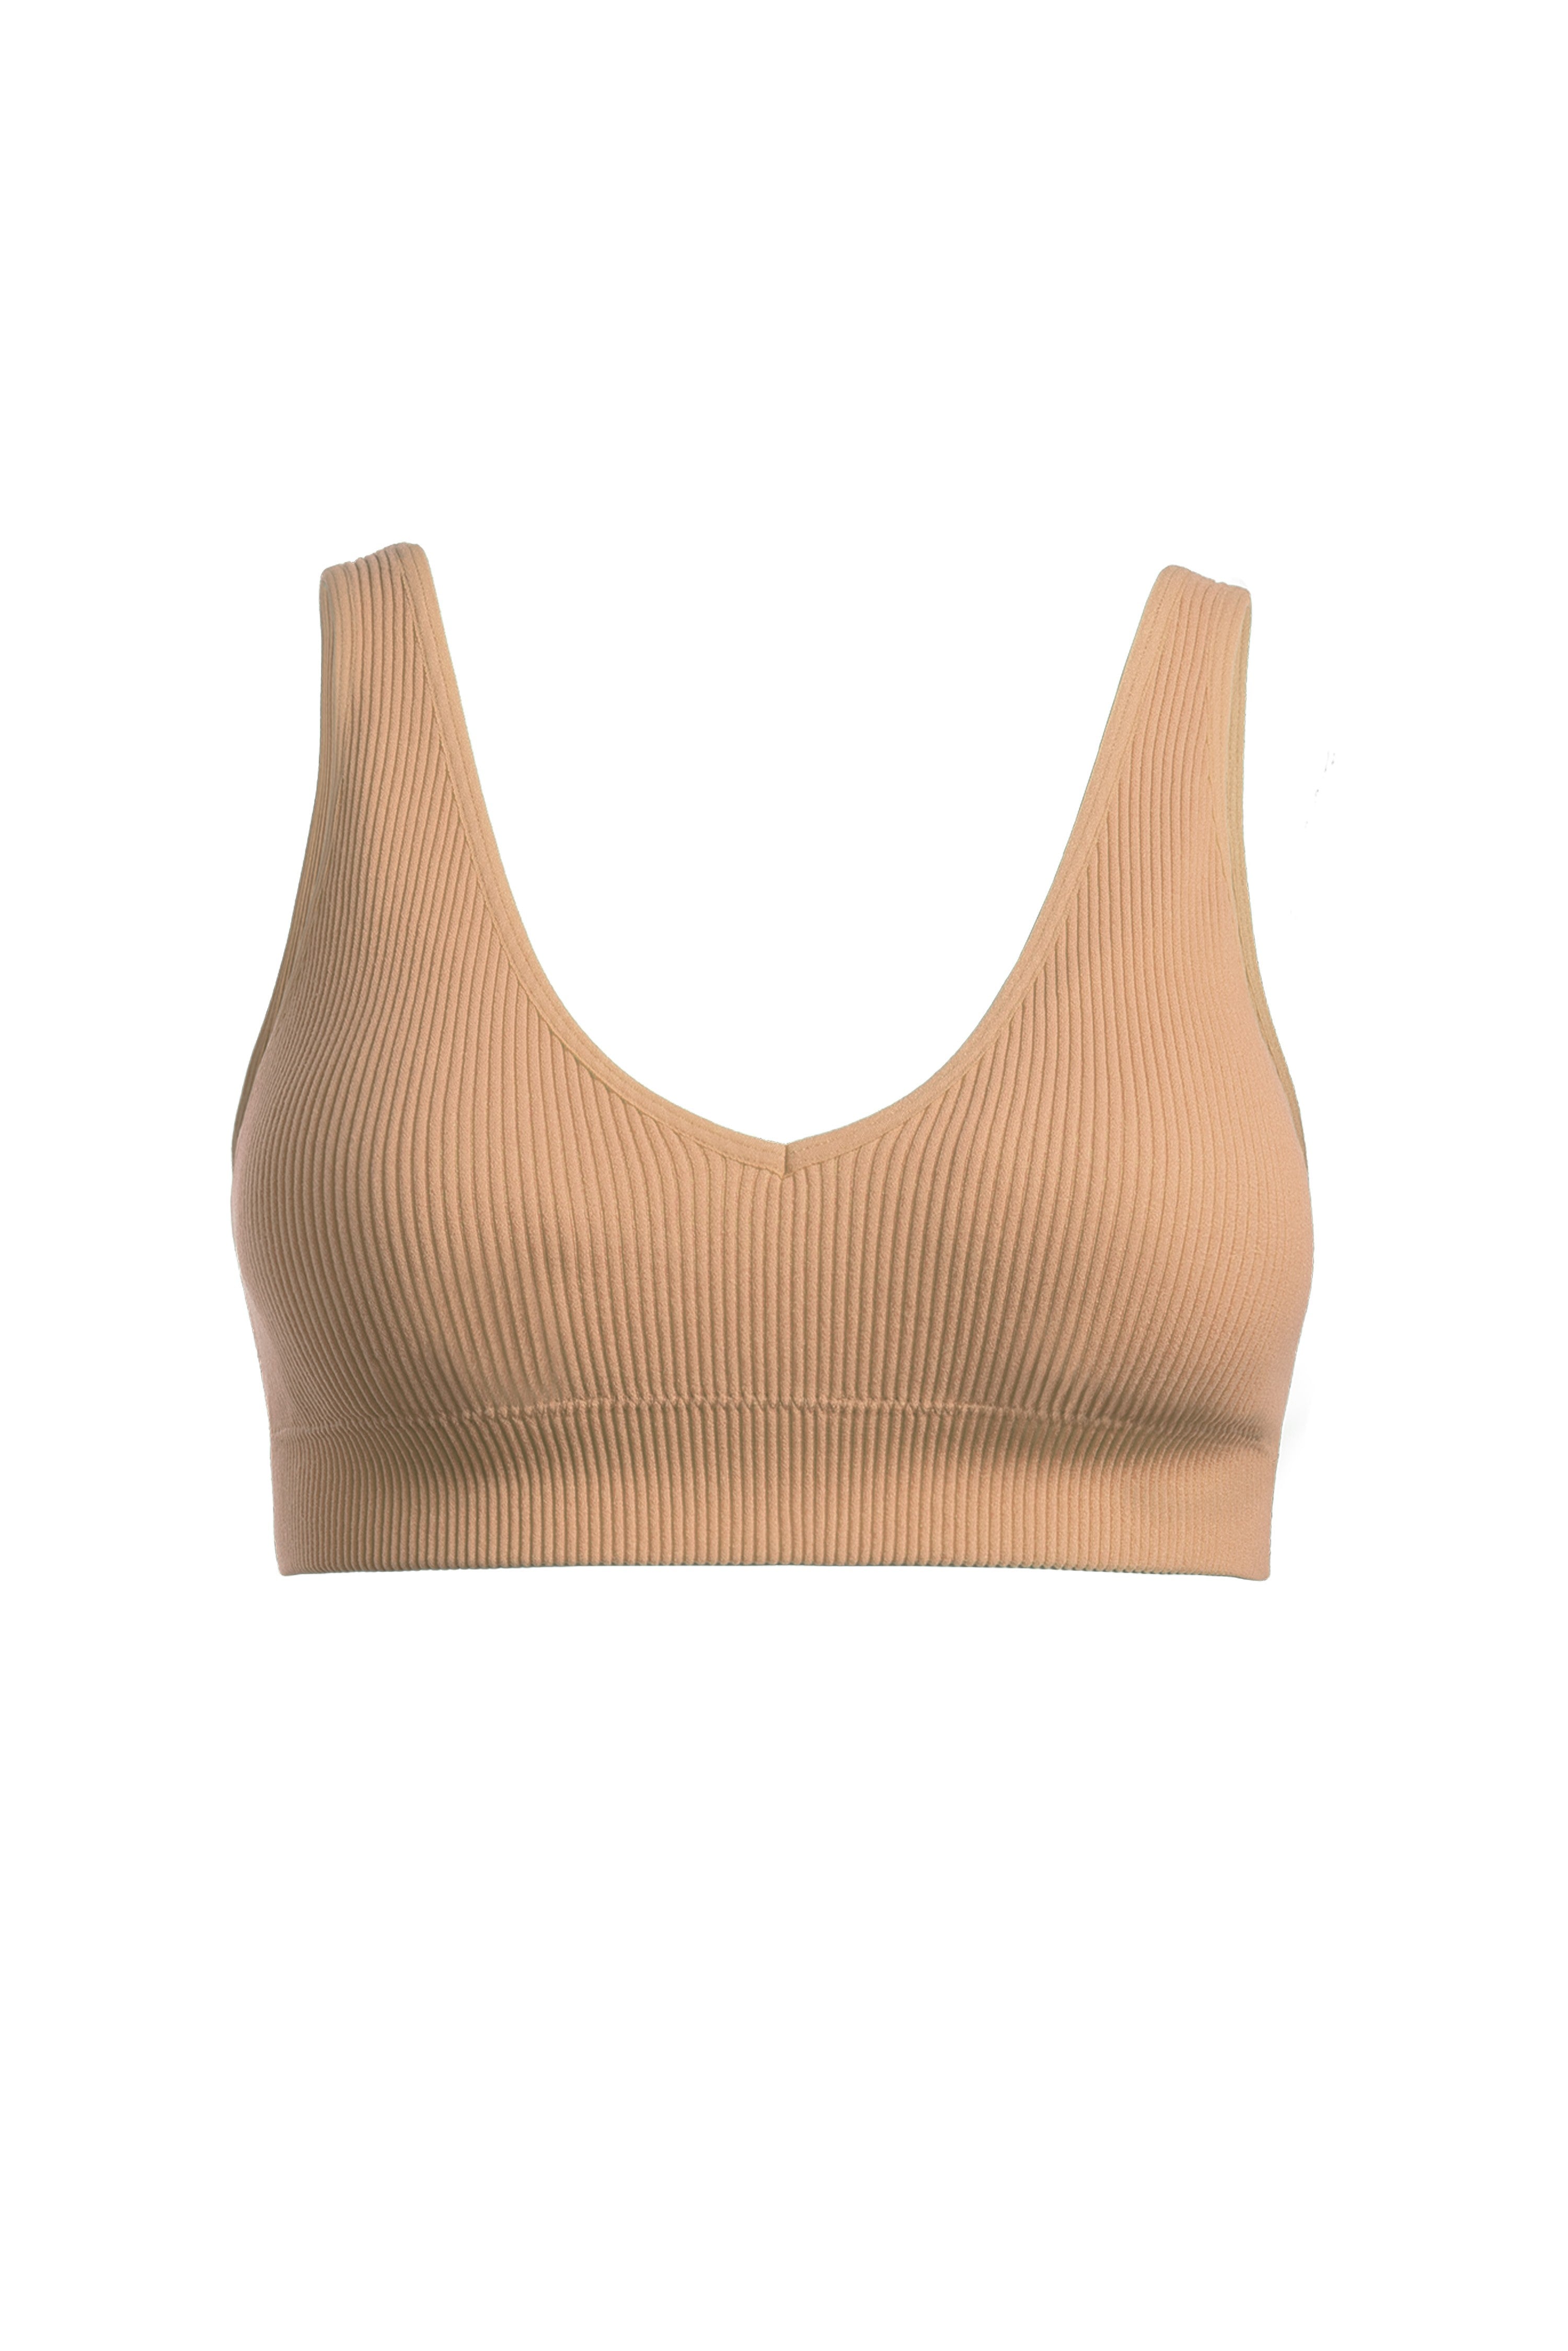 Nude Padded Rib Bralette | Collective Request 